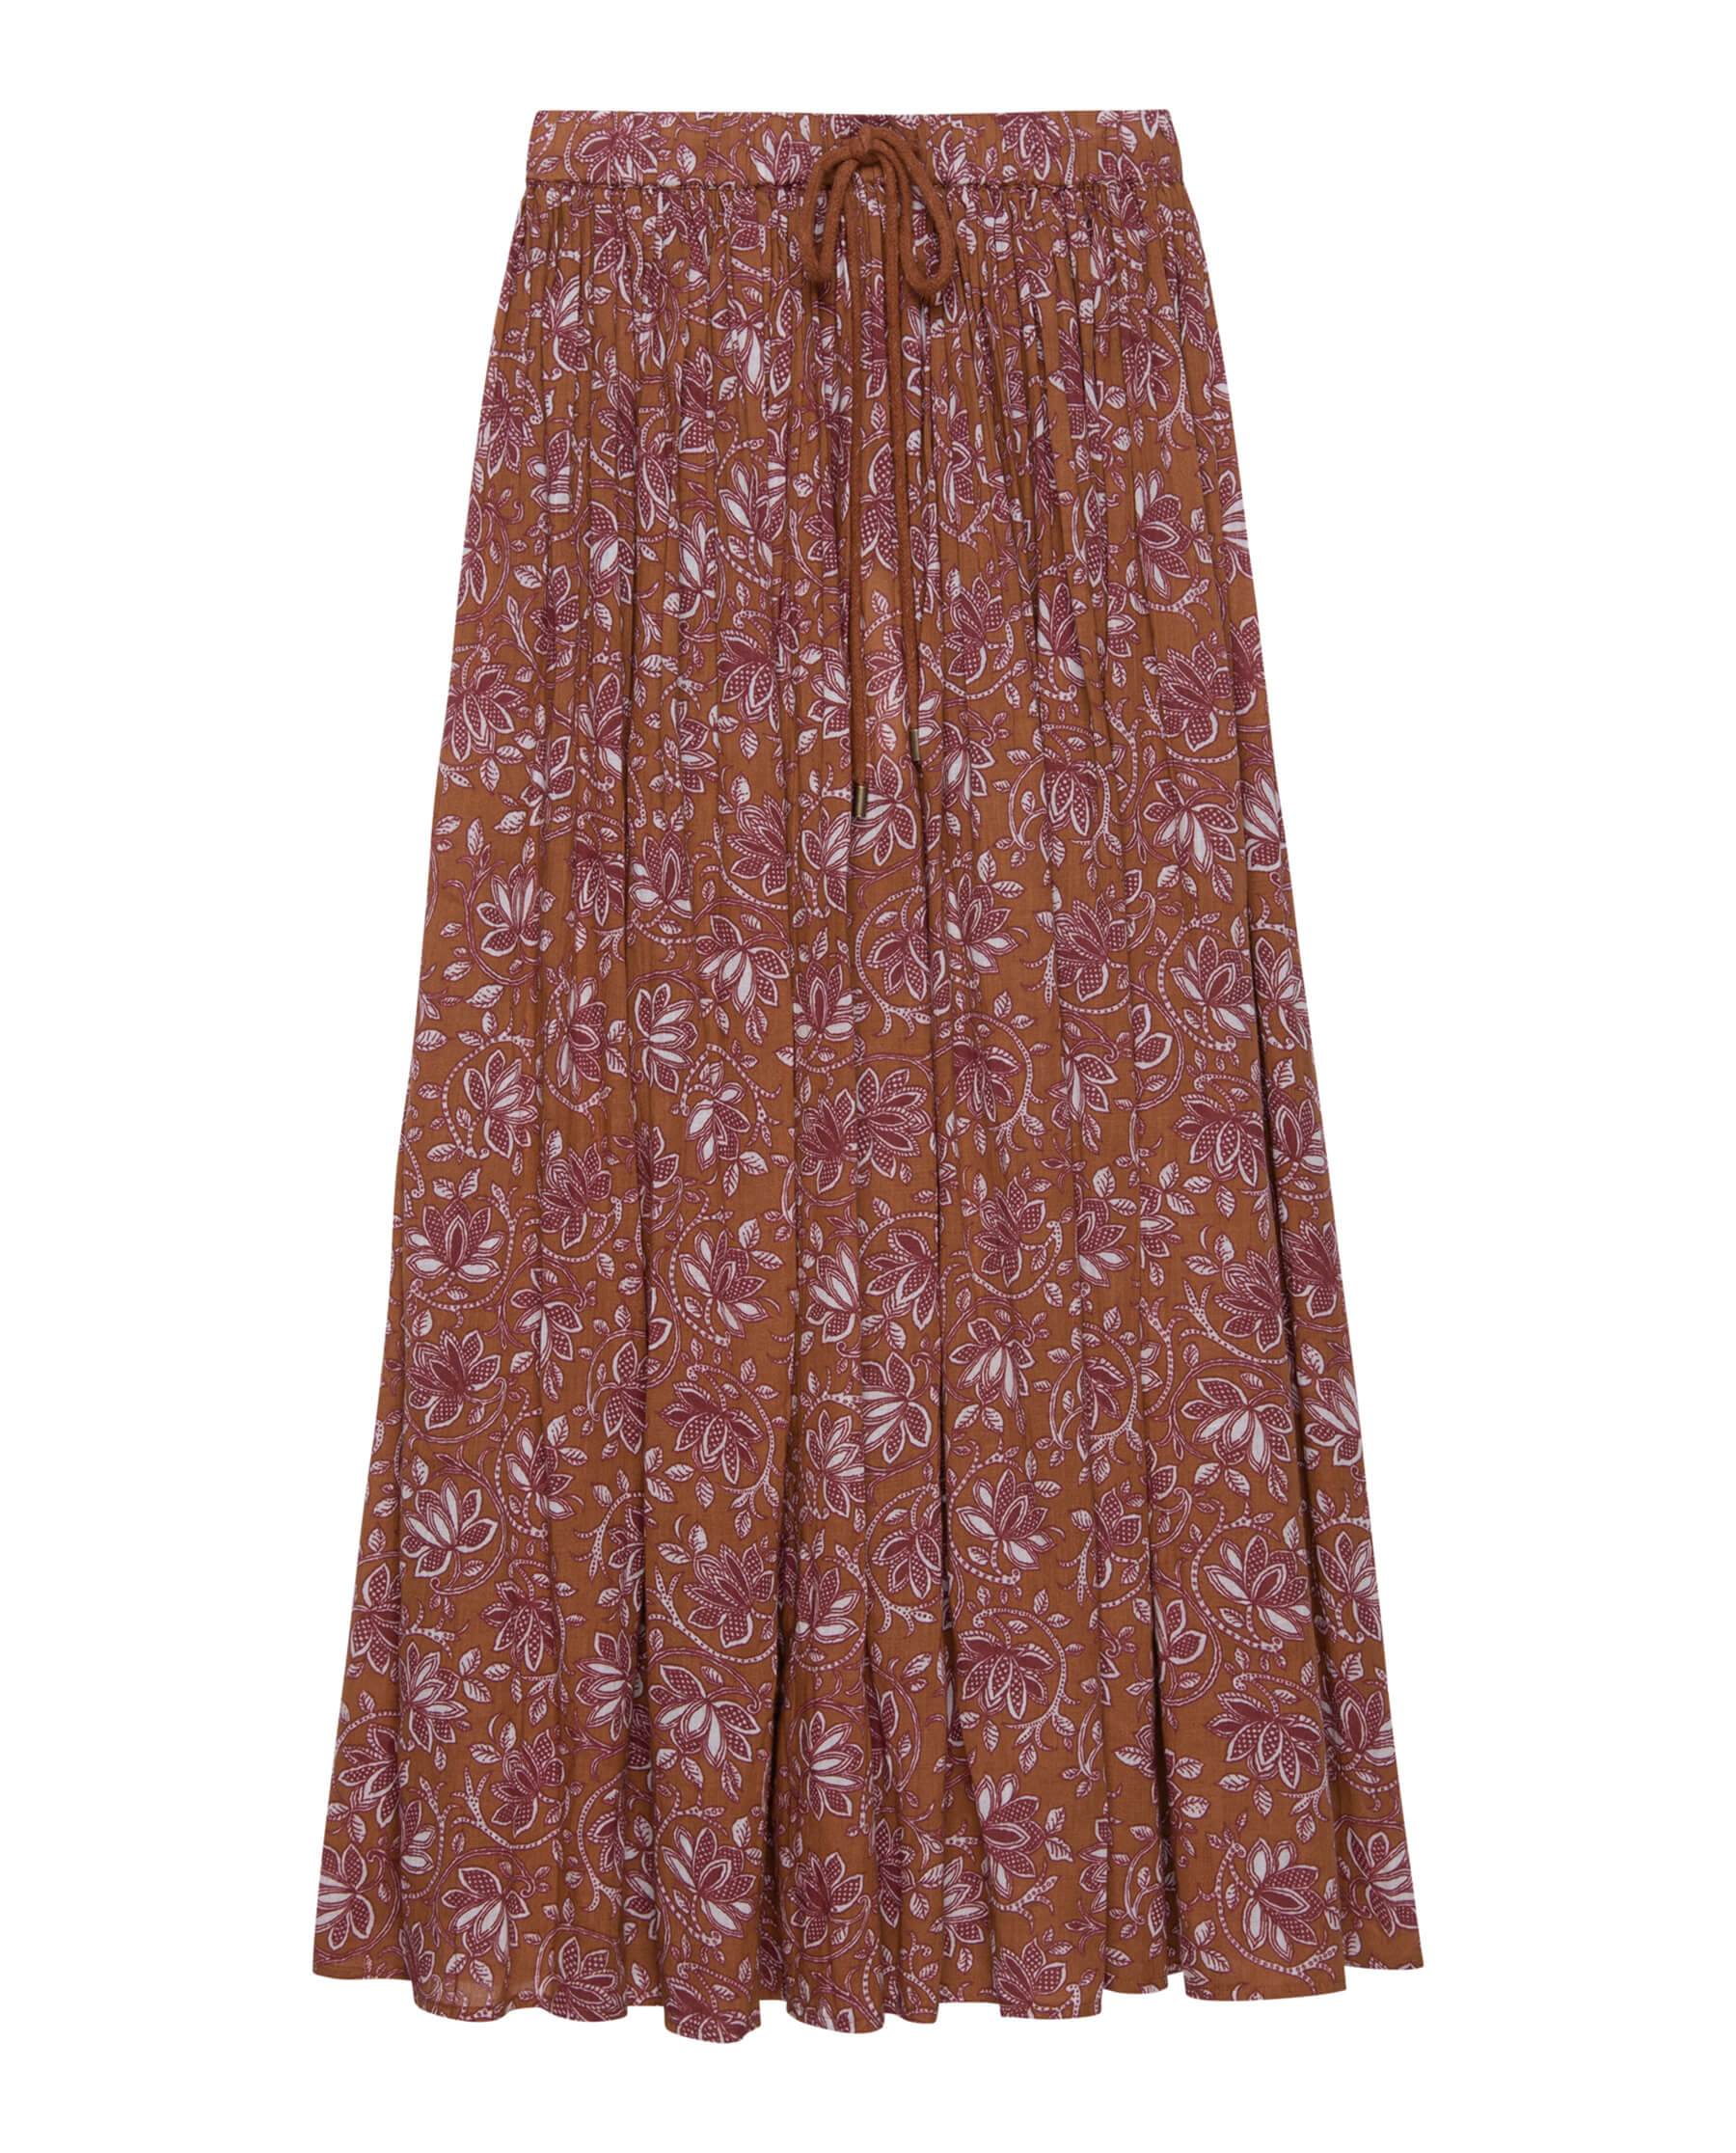 The Ripple Skirt. -- Golden Sand Oasis Floral COVER-UP SKIRTS THE GREAT. SP24 SWIM